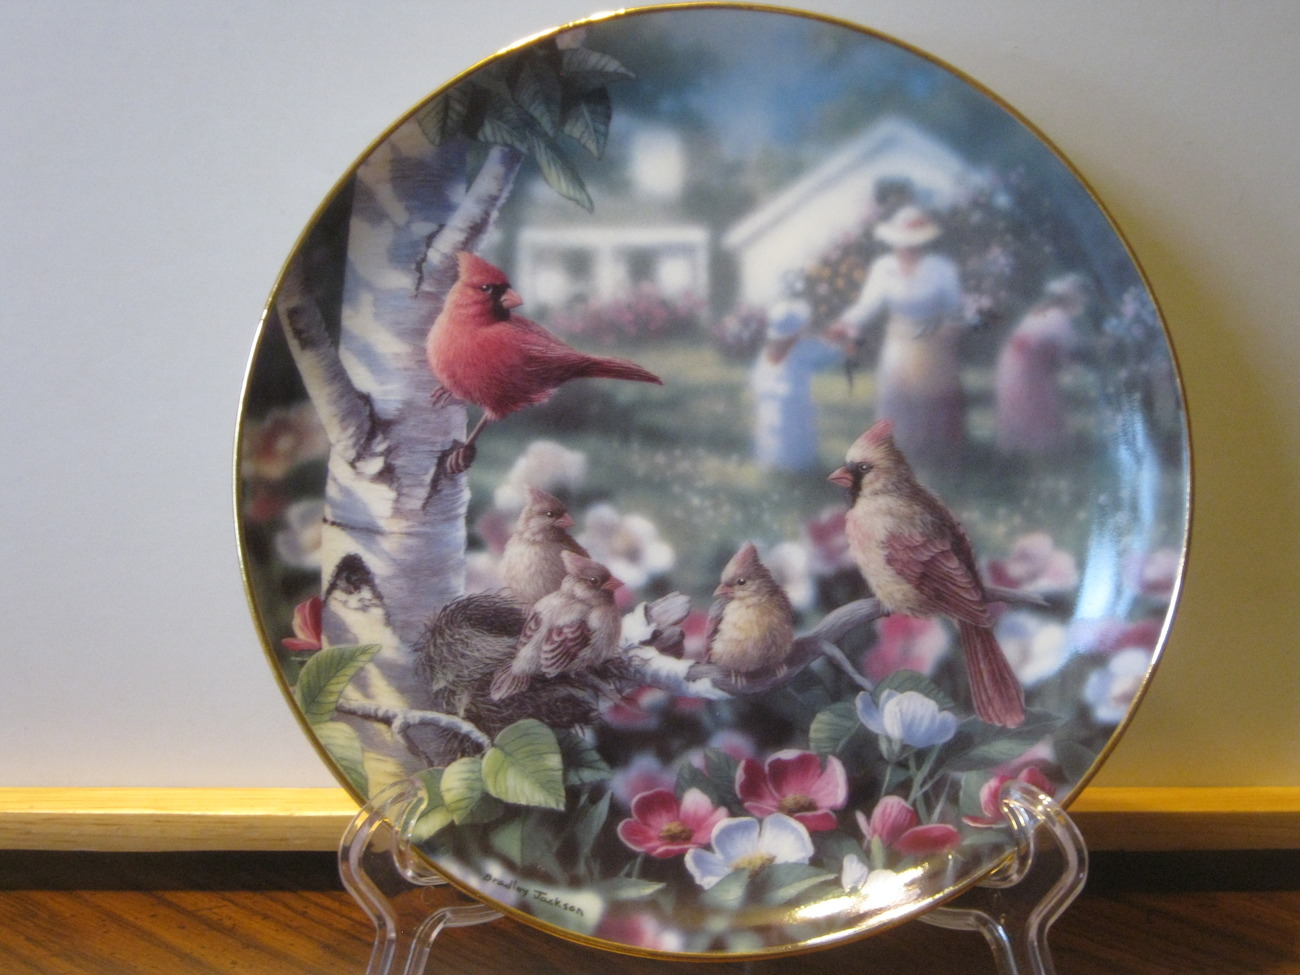 Primary image for Danbury Mint Collector Plate - "Beauty In Bloom" - Family of Cardinals in Spring